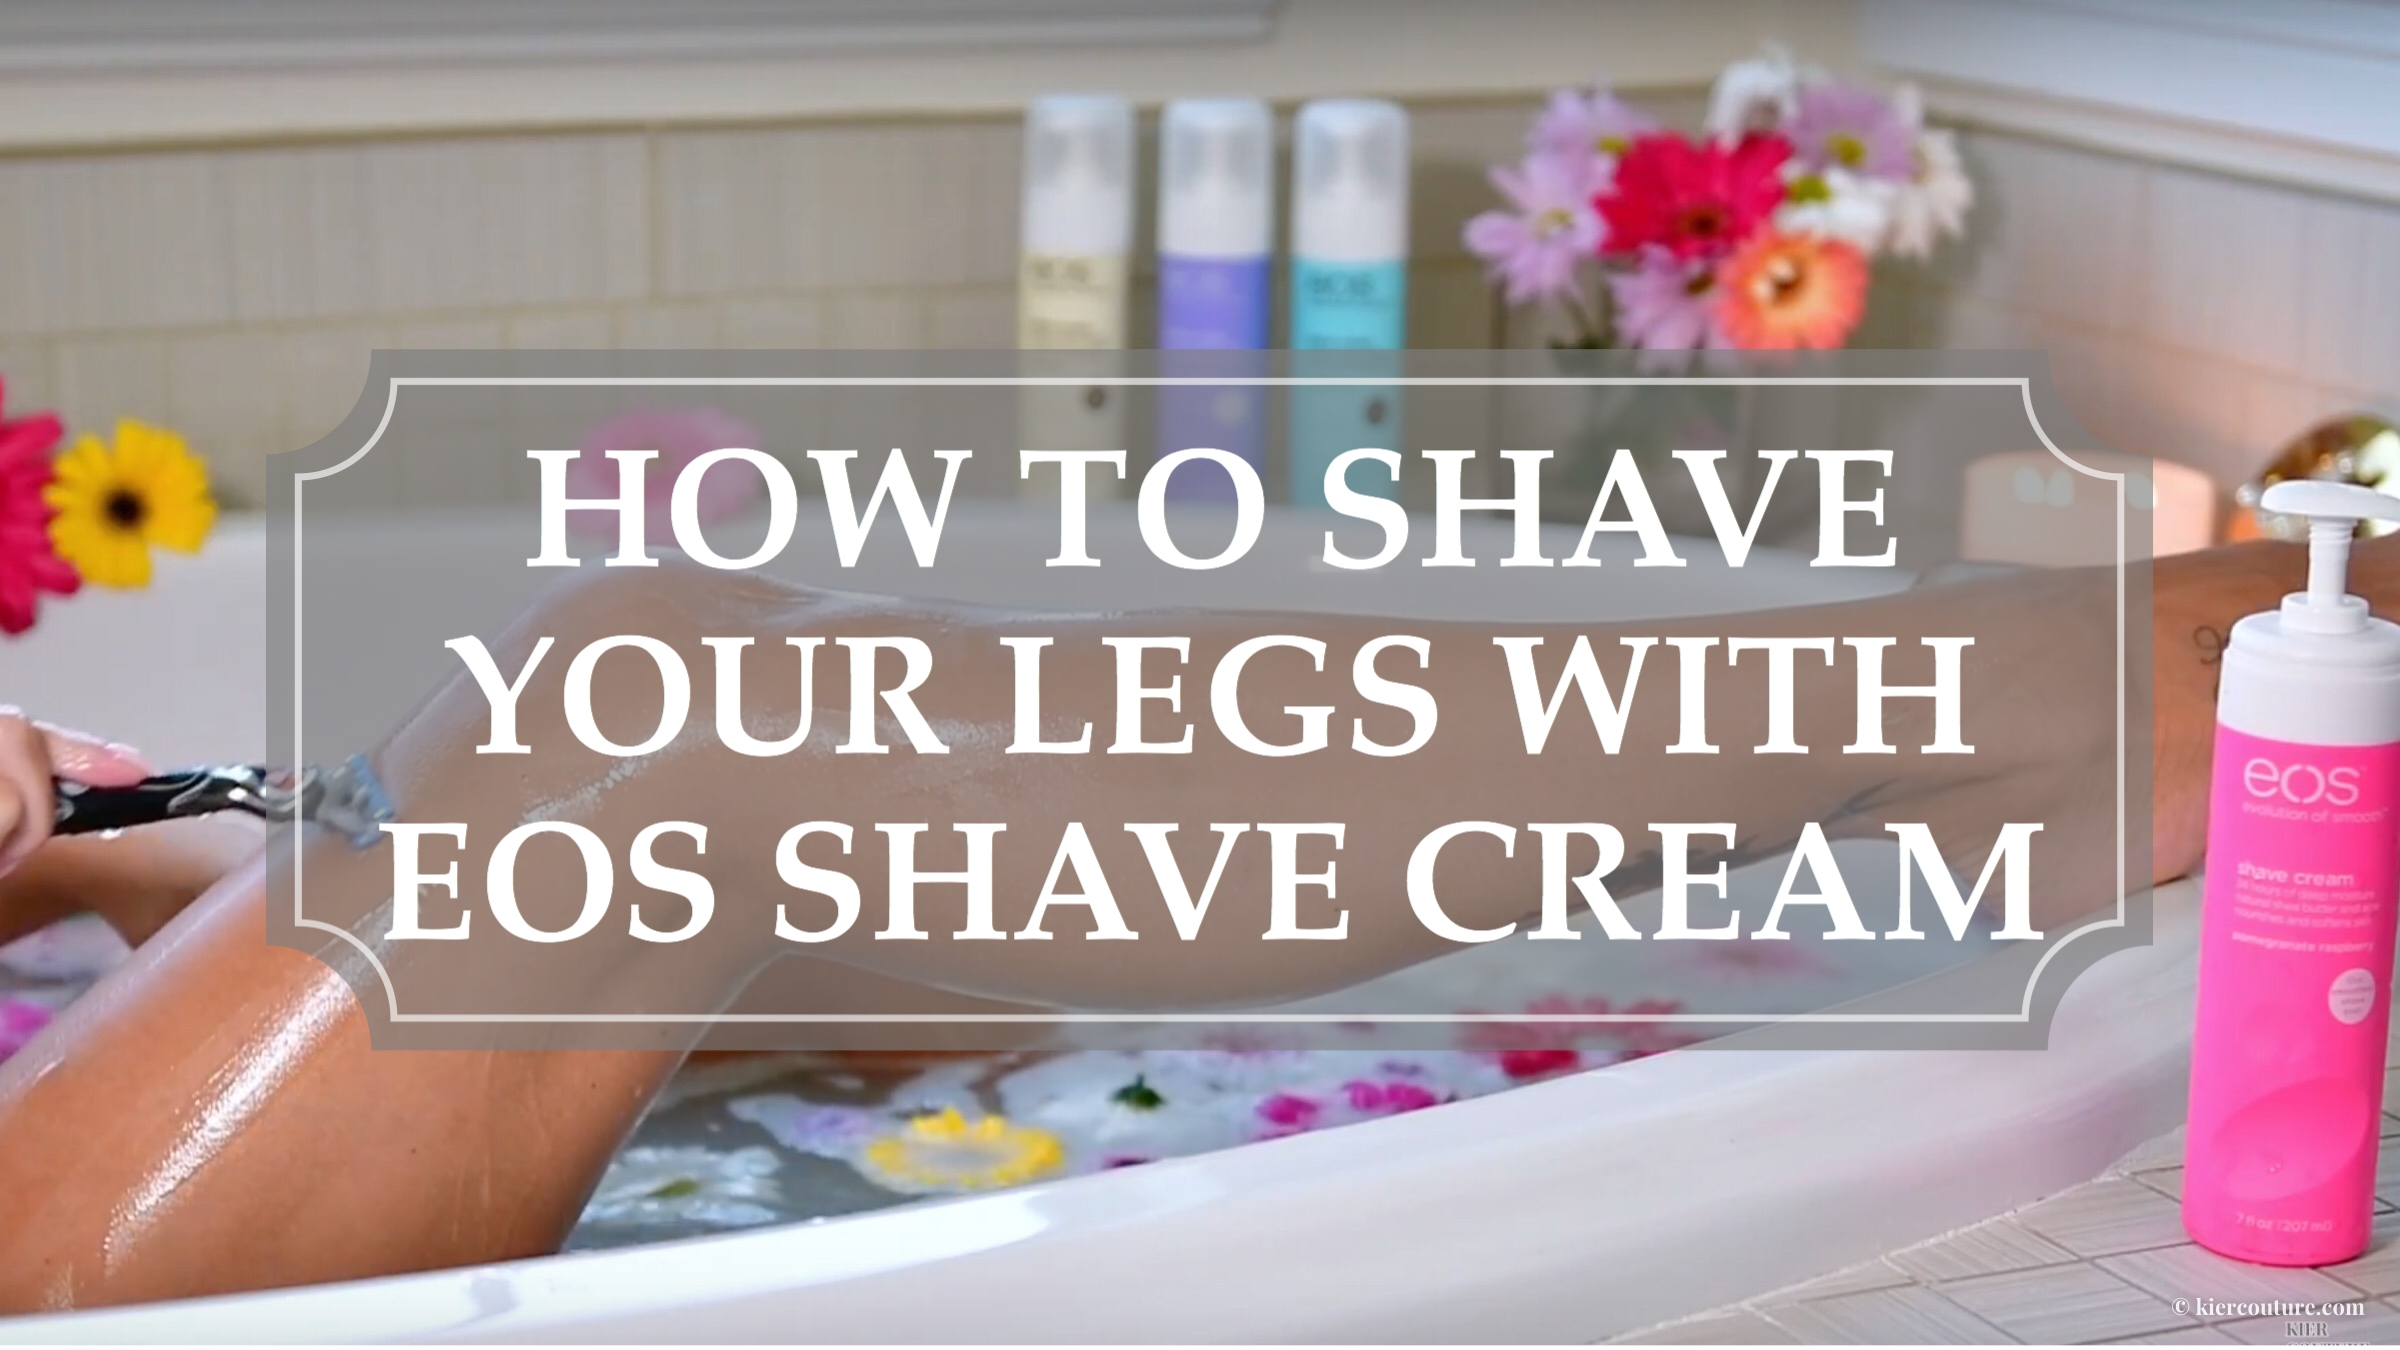 How to shave your legs